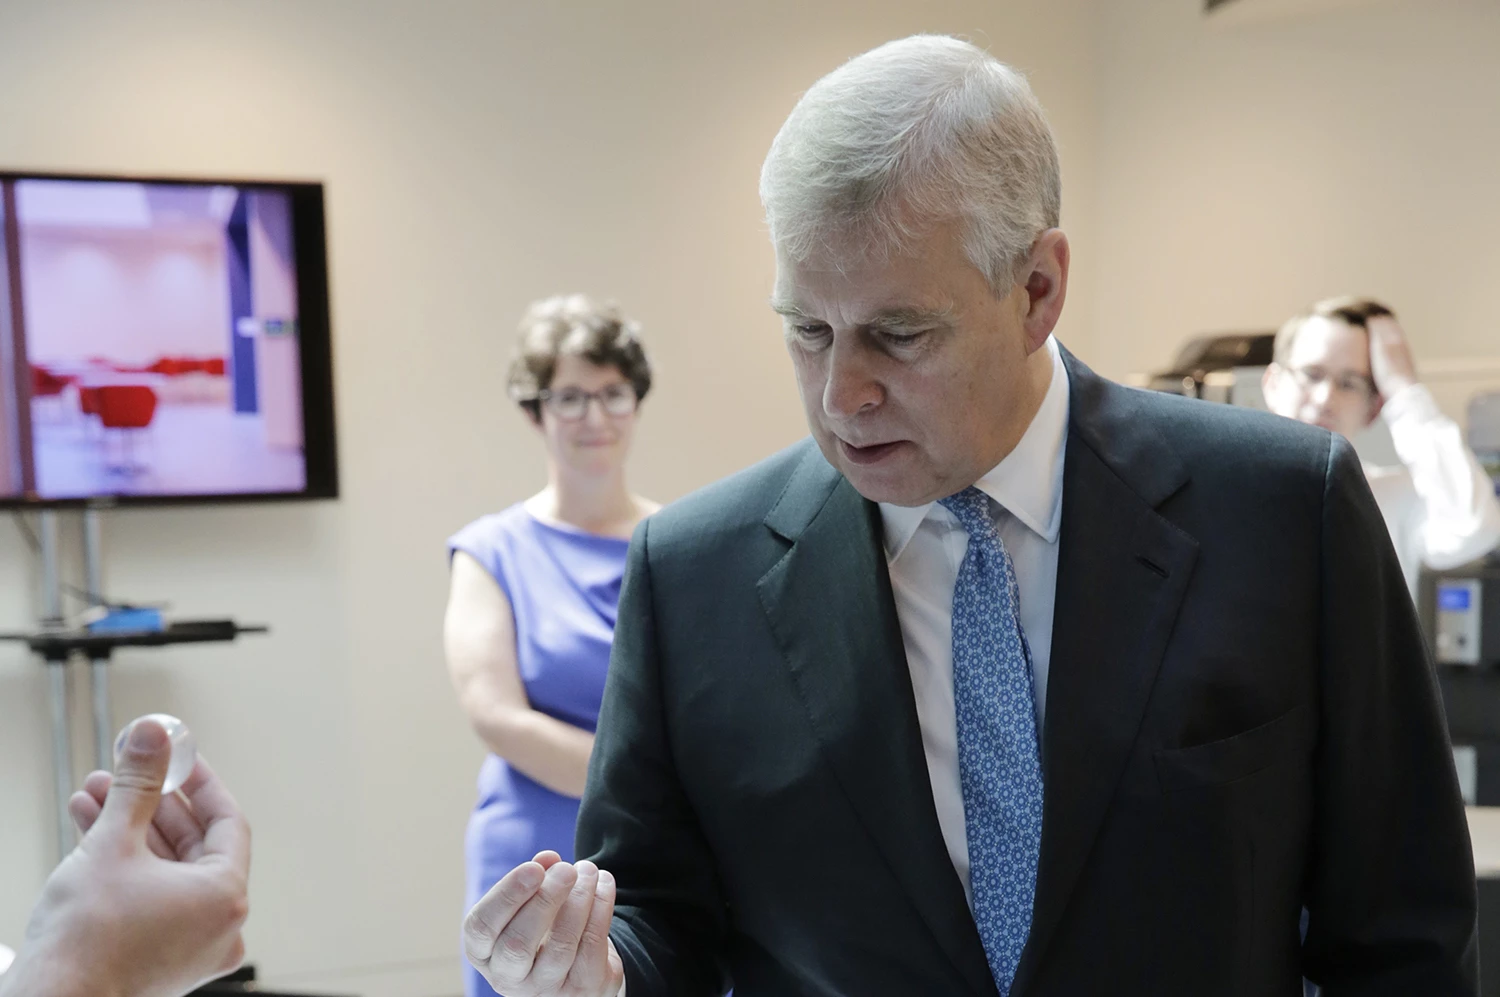 The Duke of York at the opening of Imperial's new incubator.